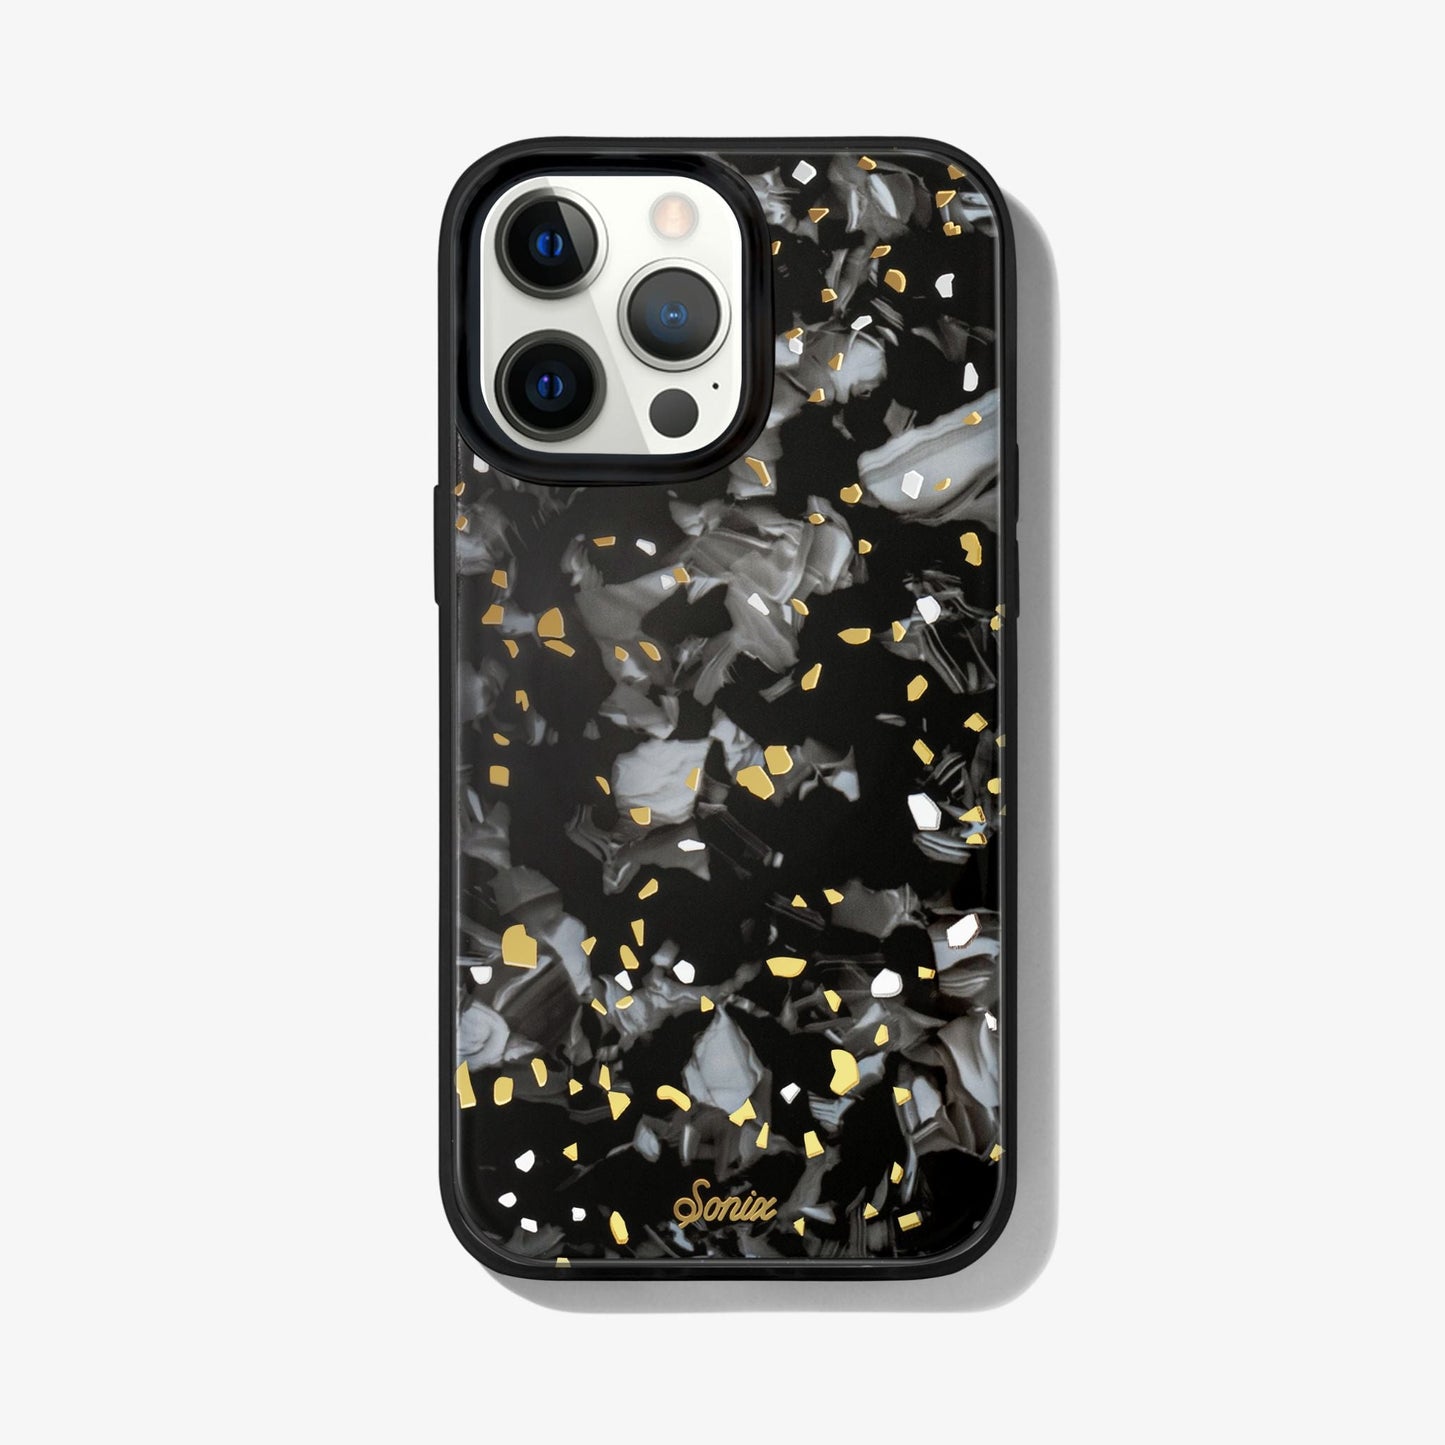 Dark galaxy rocks with highlights of gold and white on a black base.case shown on an iphone 13 pro max